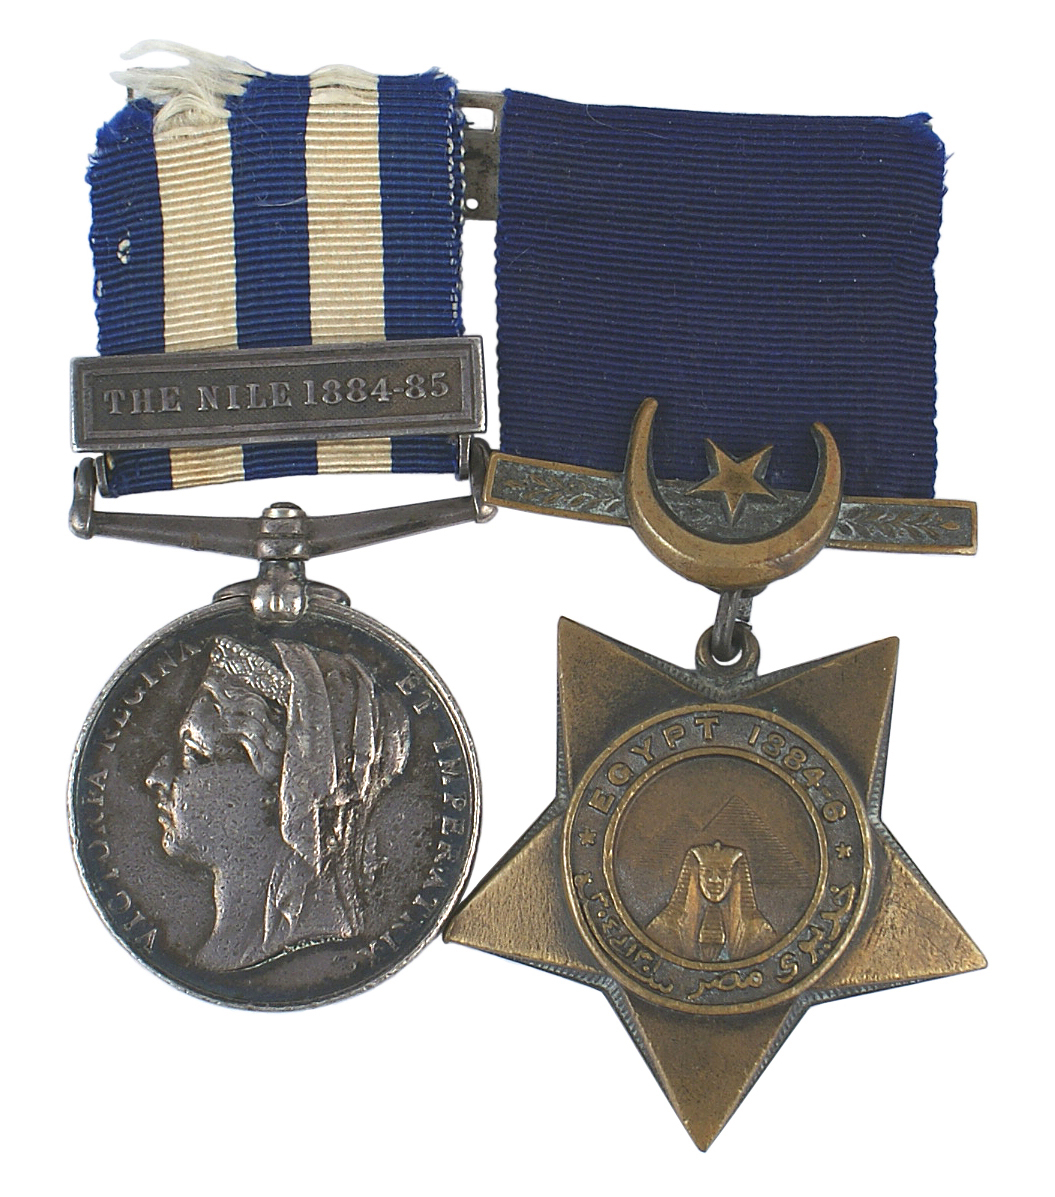 British medal bar with two medals awarded for the Sudan campaign of the 1880s, one bearing a likeness of Queen Victoria and the other showing a sphinx and pyramids. Price realized: $519. Mohawk Arms Inc. image